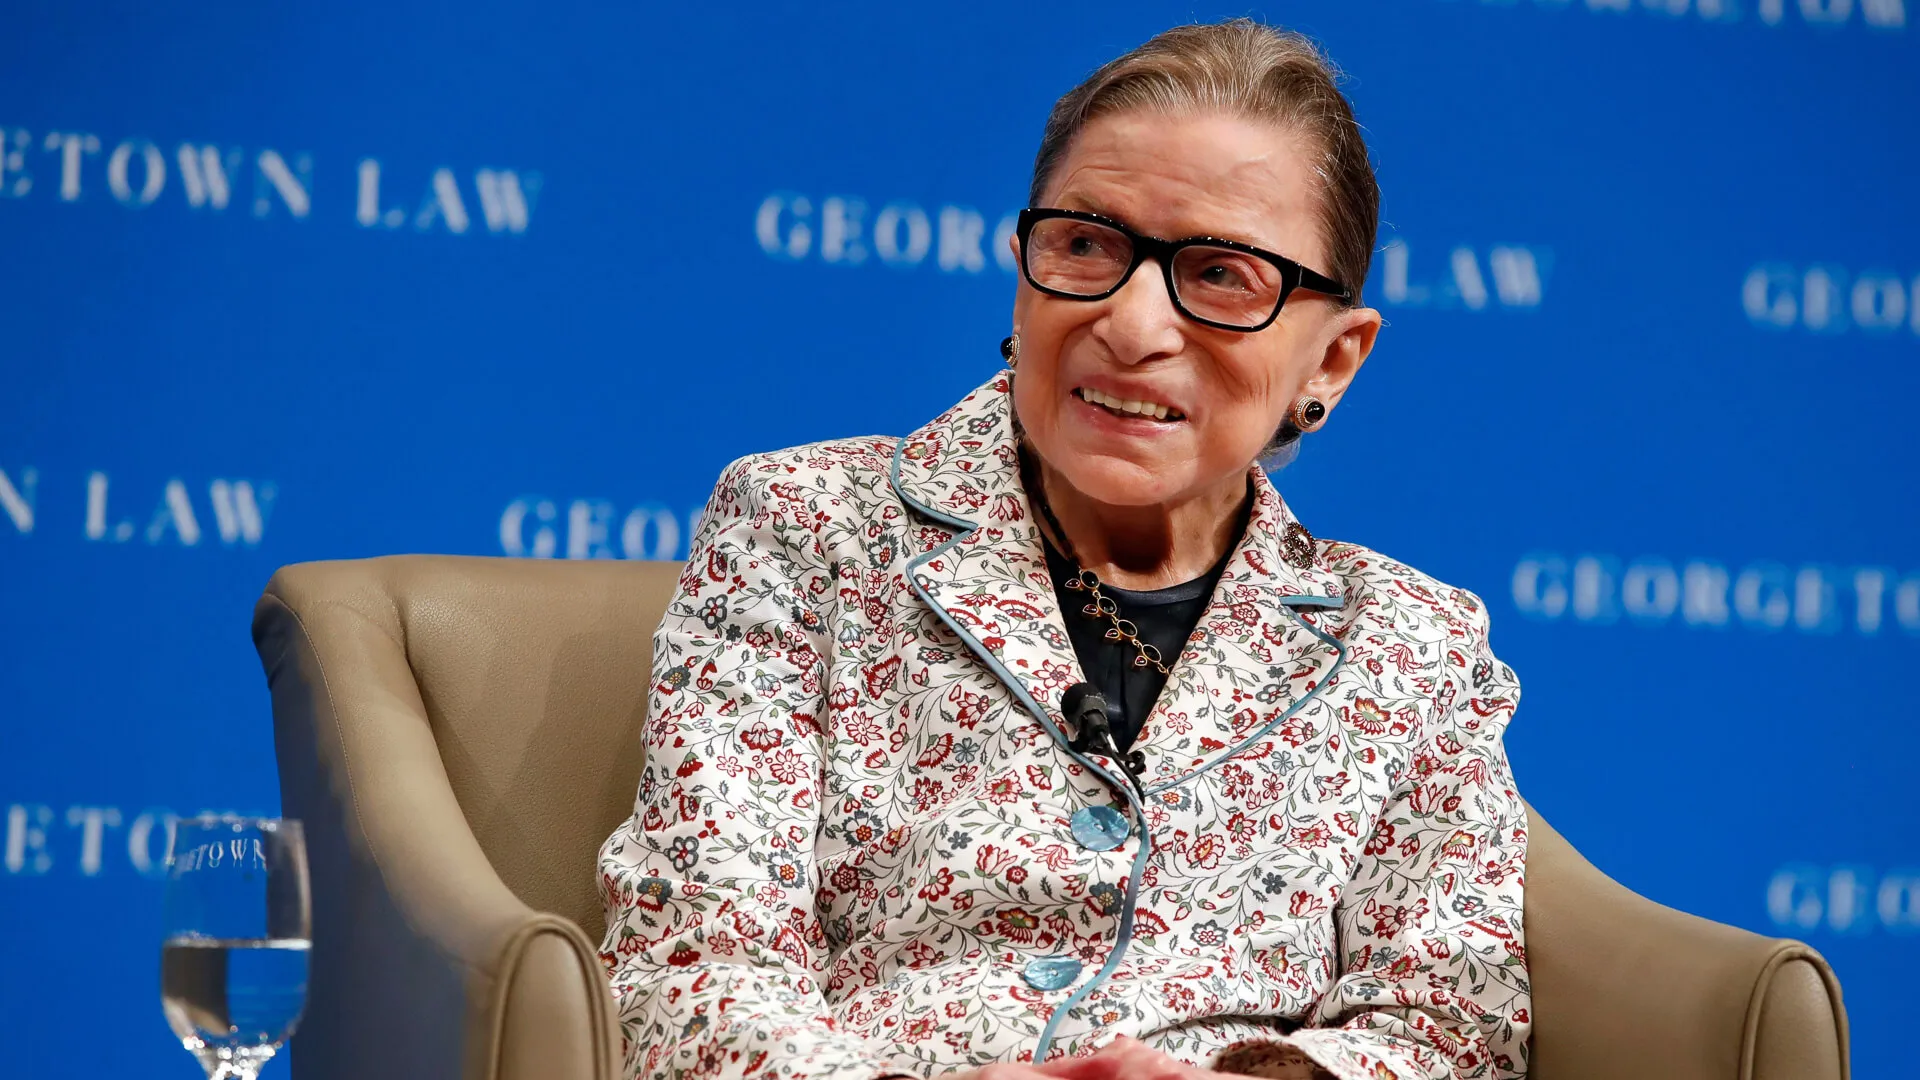 Supreme Court Justice Ruth Bader Ginsburg on stage during interview